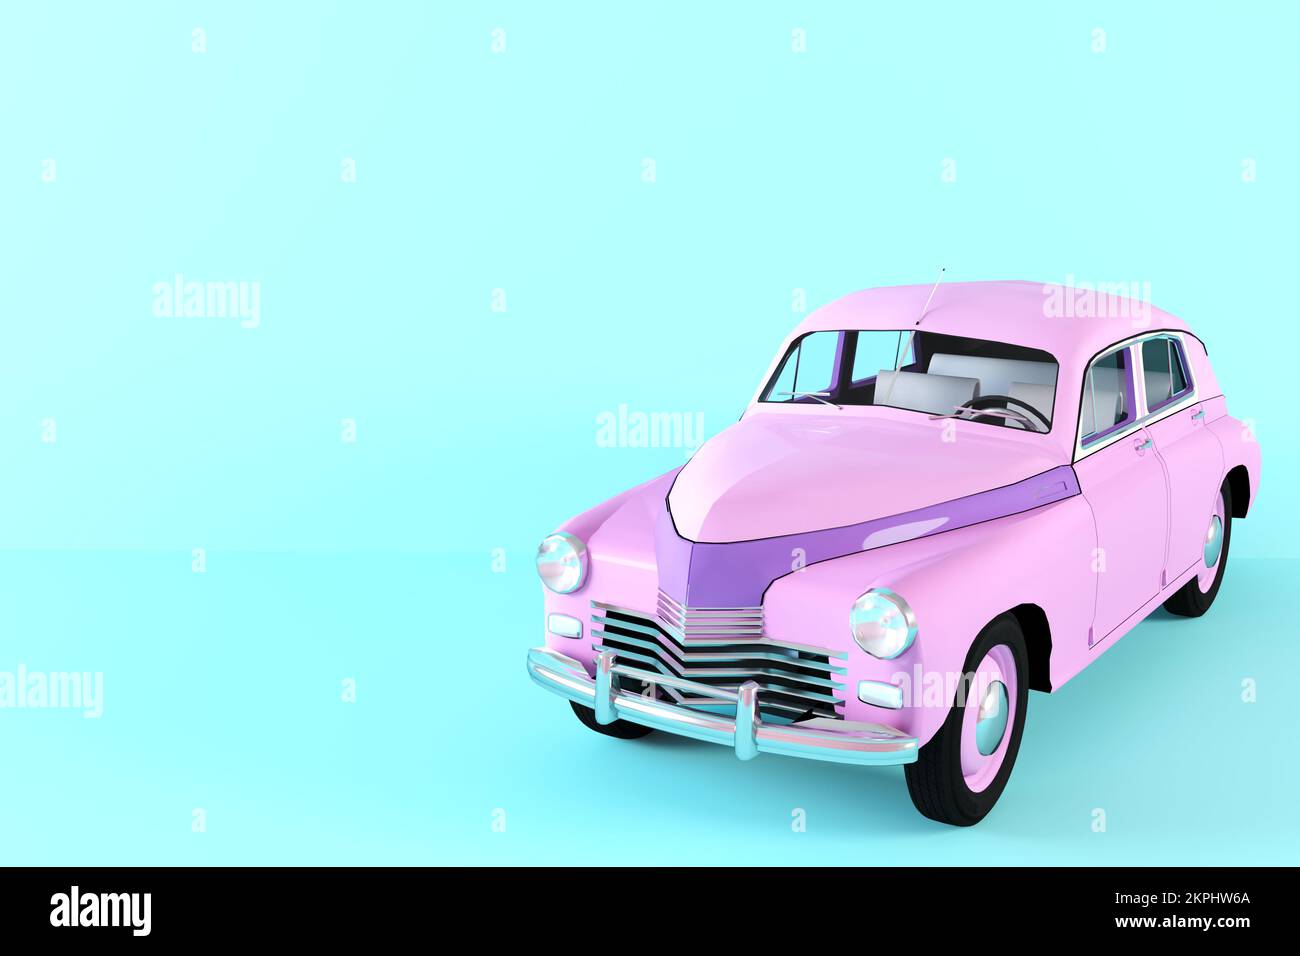 Vintage purple toy car on blue background 3D illustration. Scale model of retro car with light pastel tasty colors. Classic rare car. Stylized toy Stock Photo